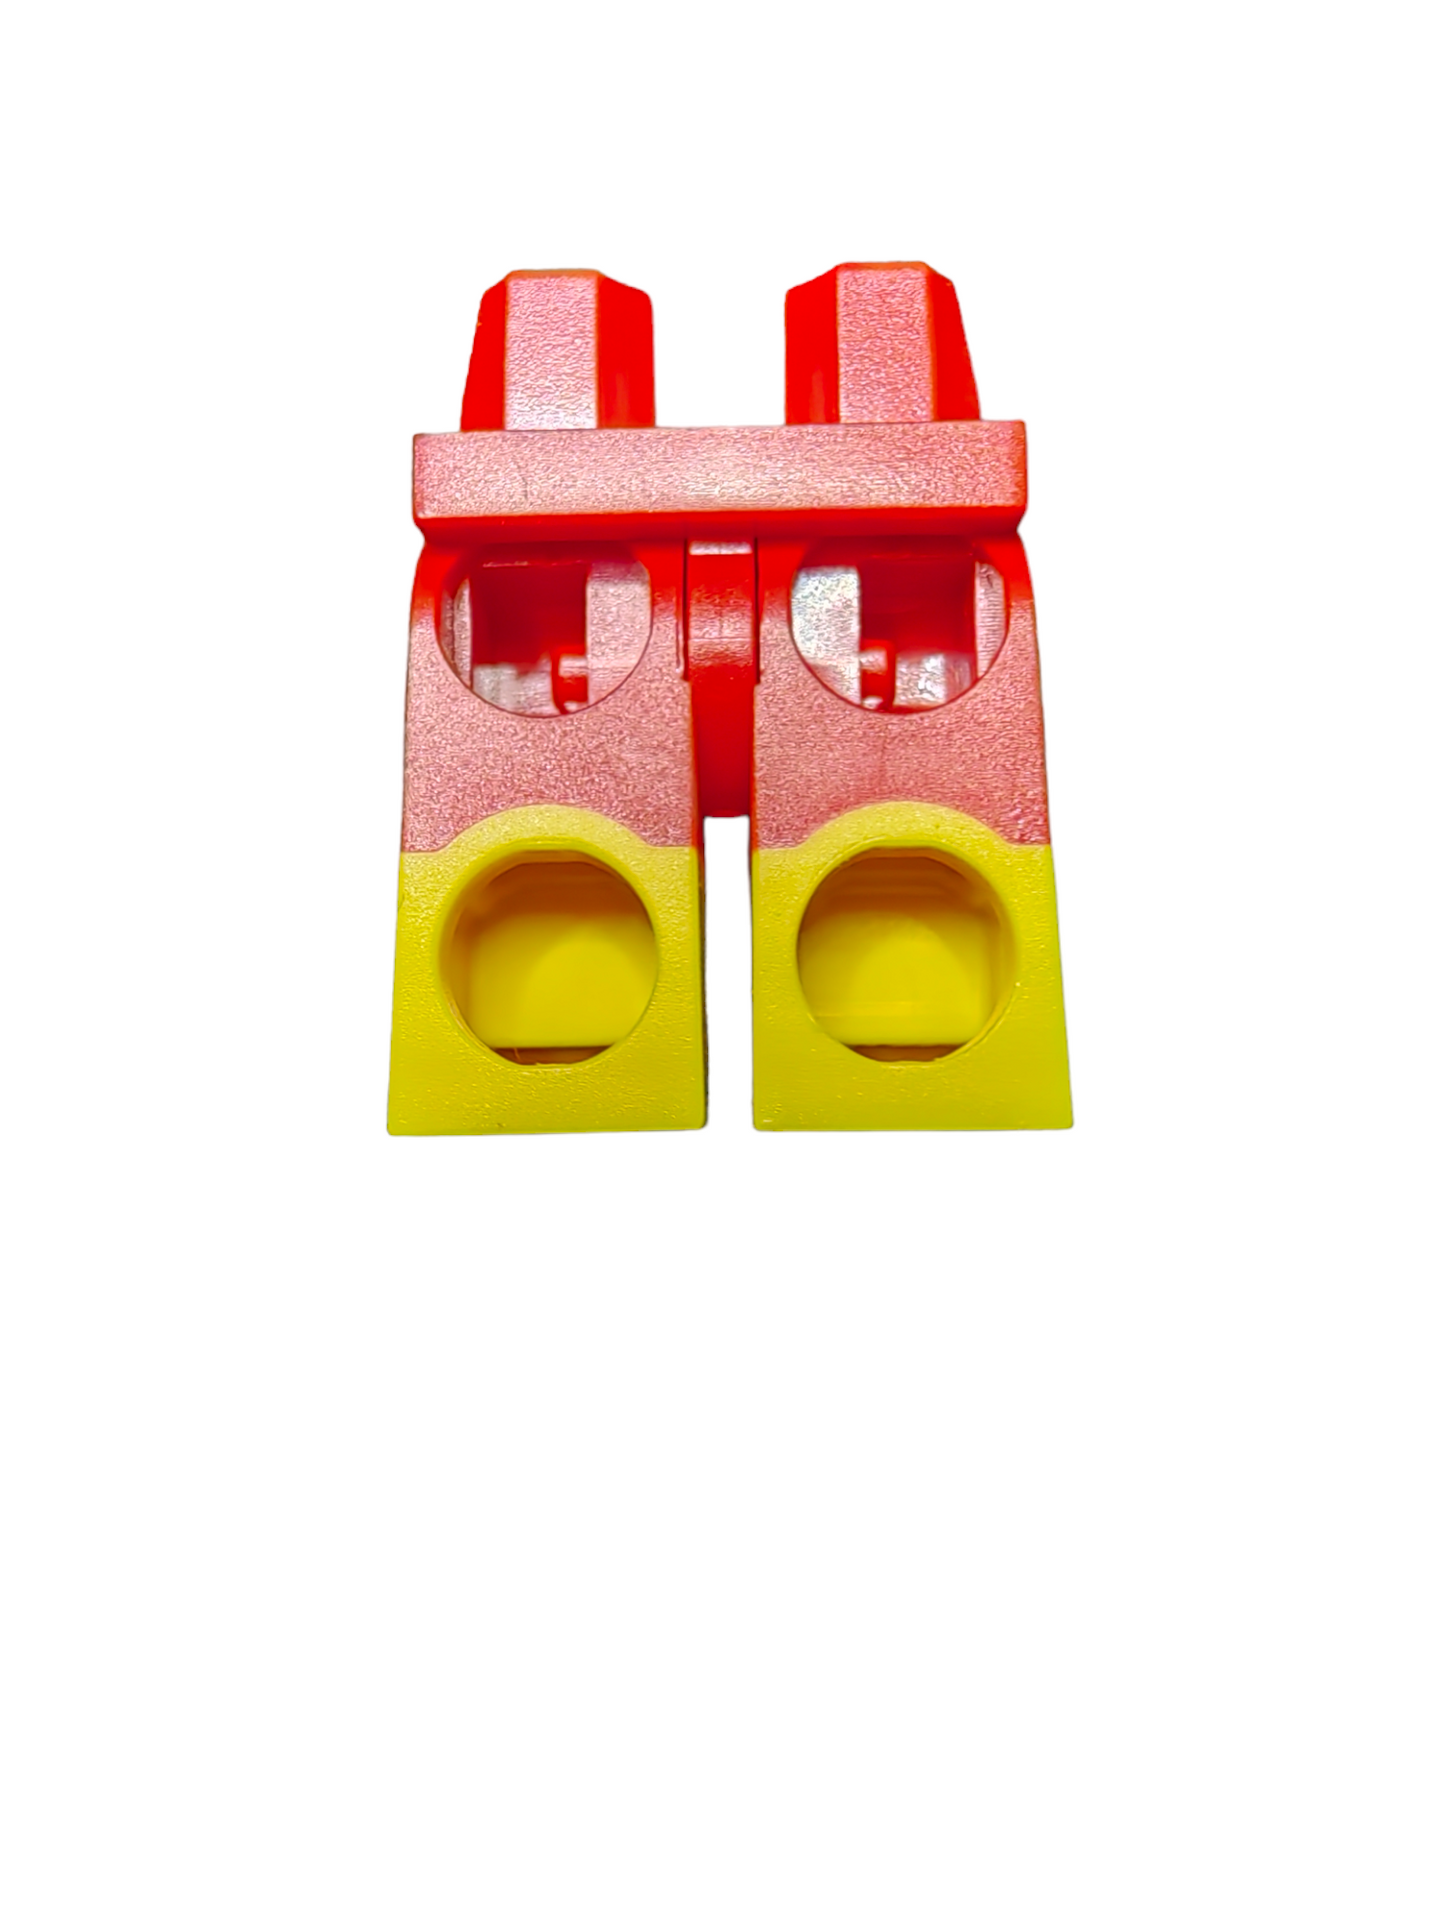 Minifigure Legs, Red with Yellow Boots - UB1427